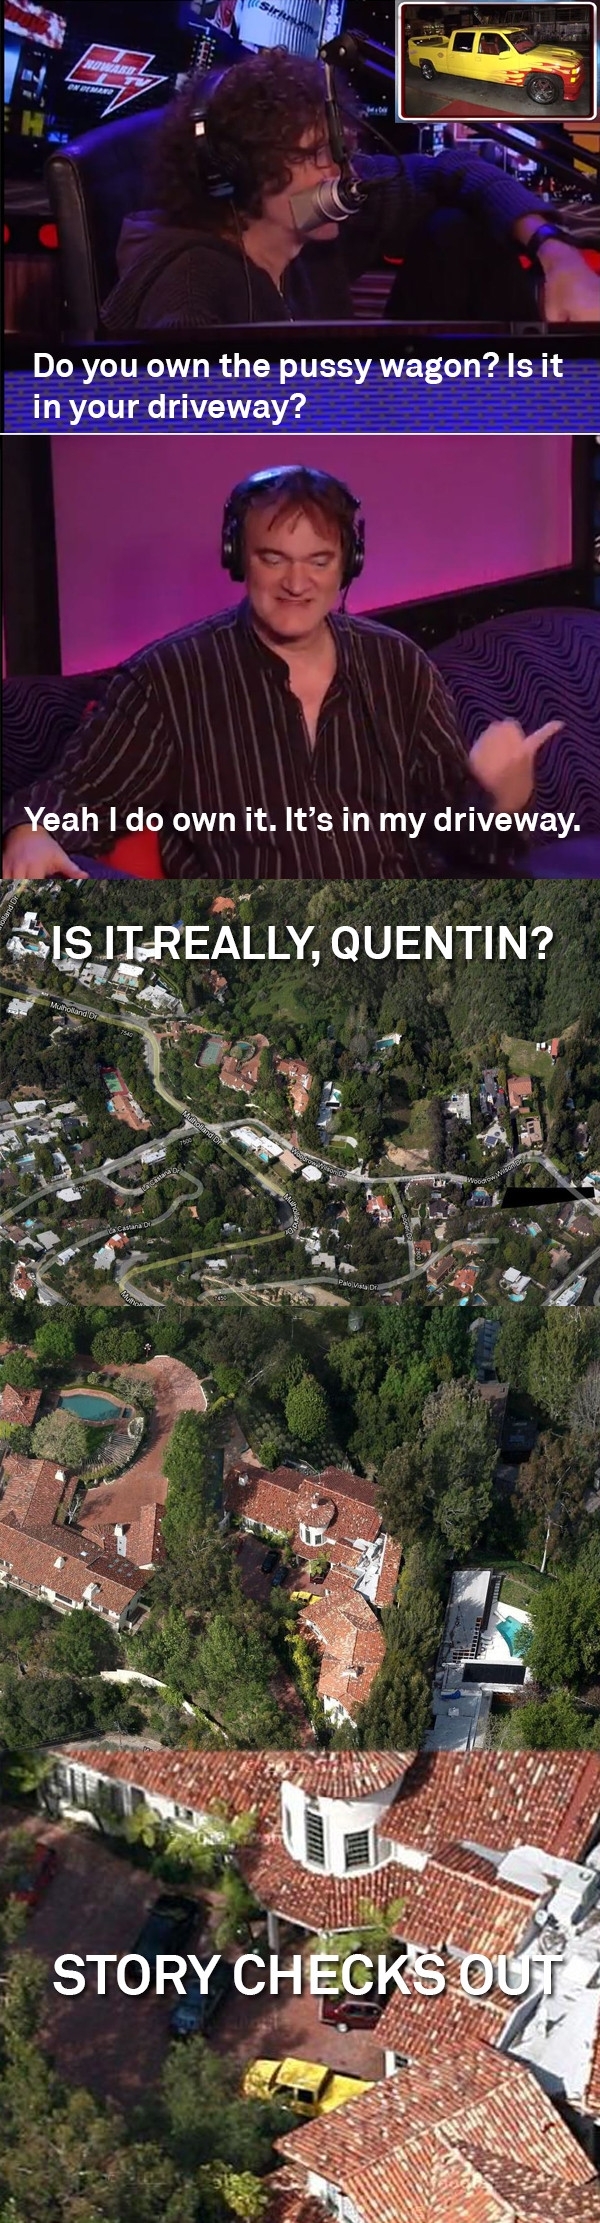 Alright Quentin your story checks out